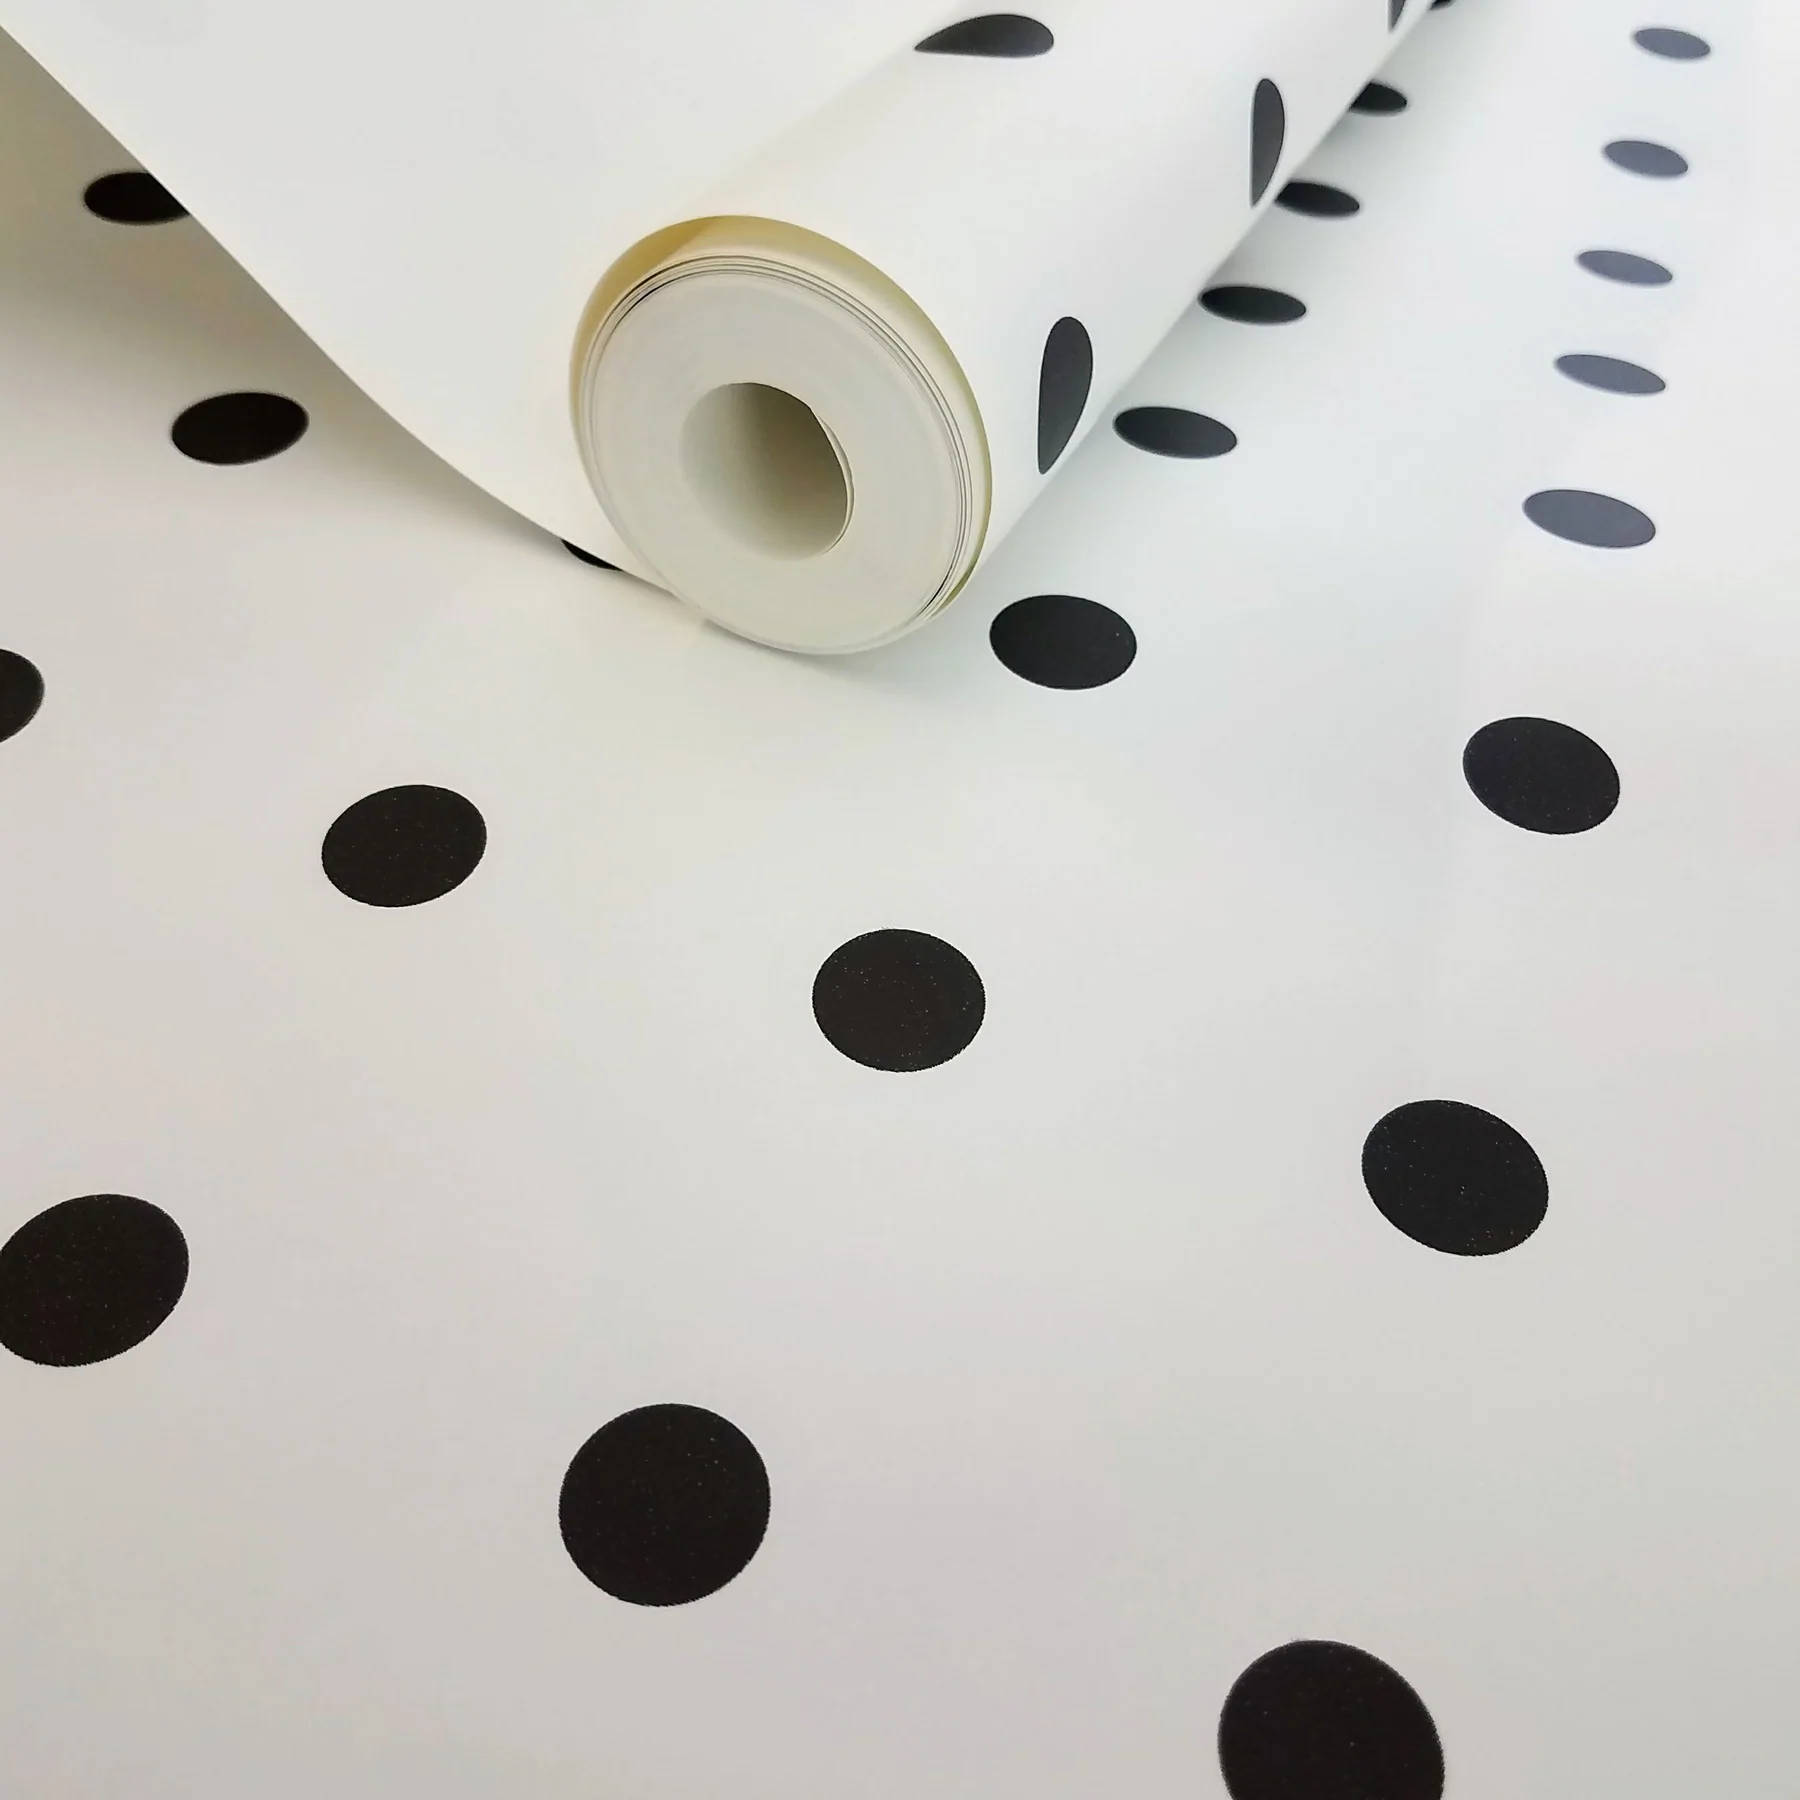 Wrapping Paper Black Dot Iphone Background